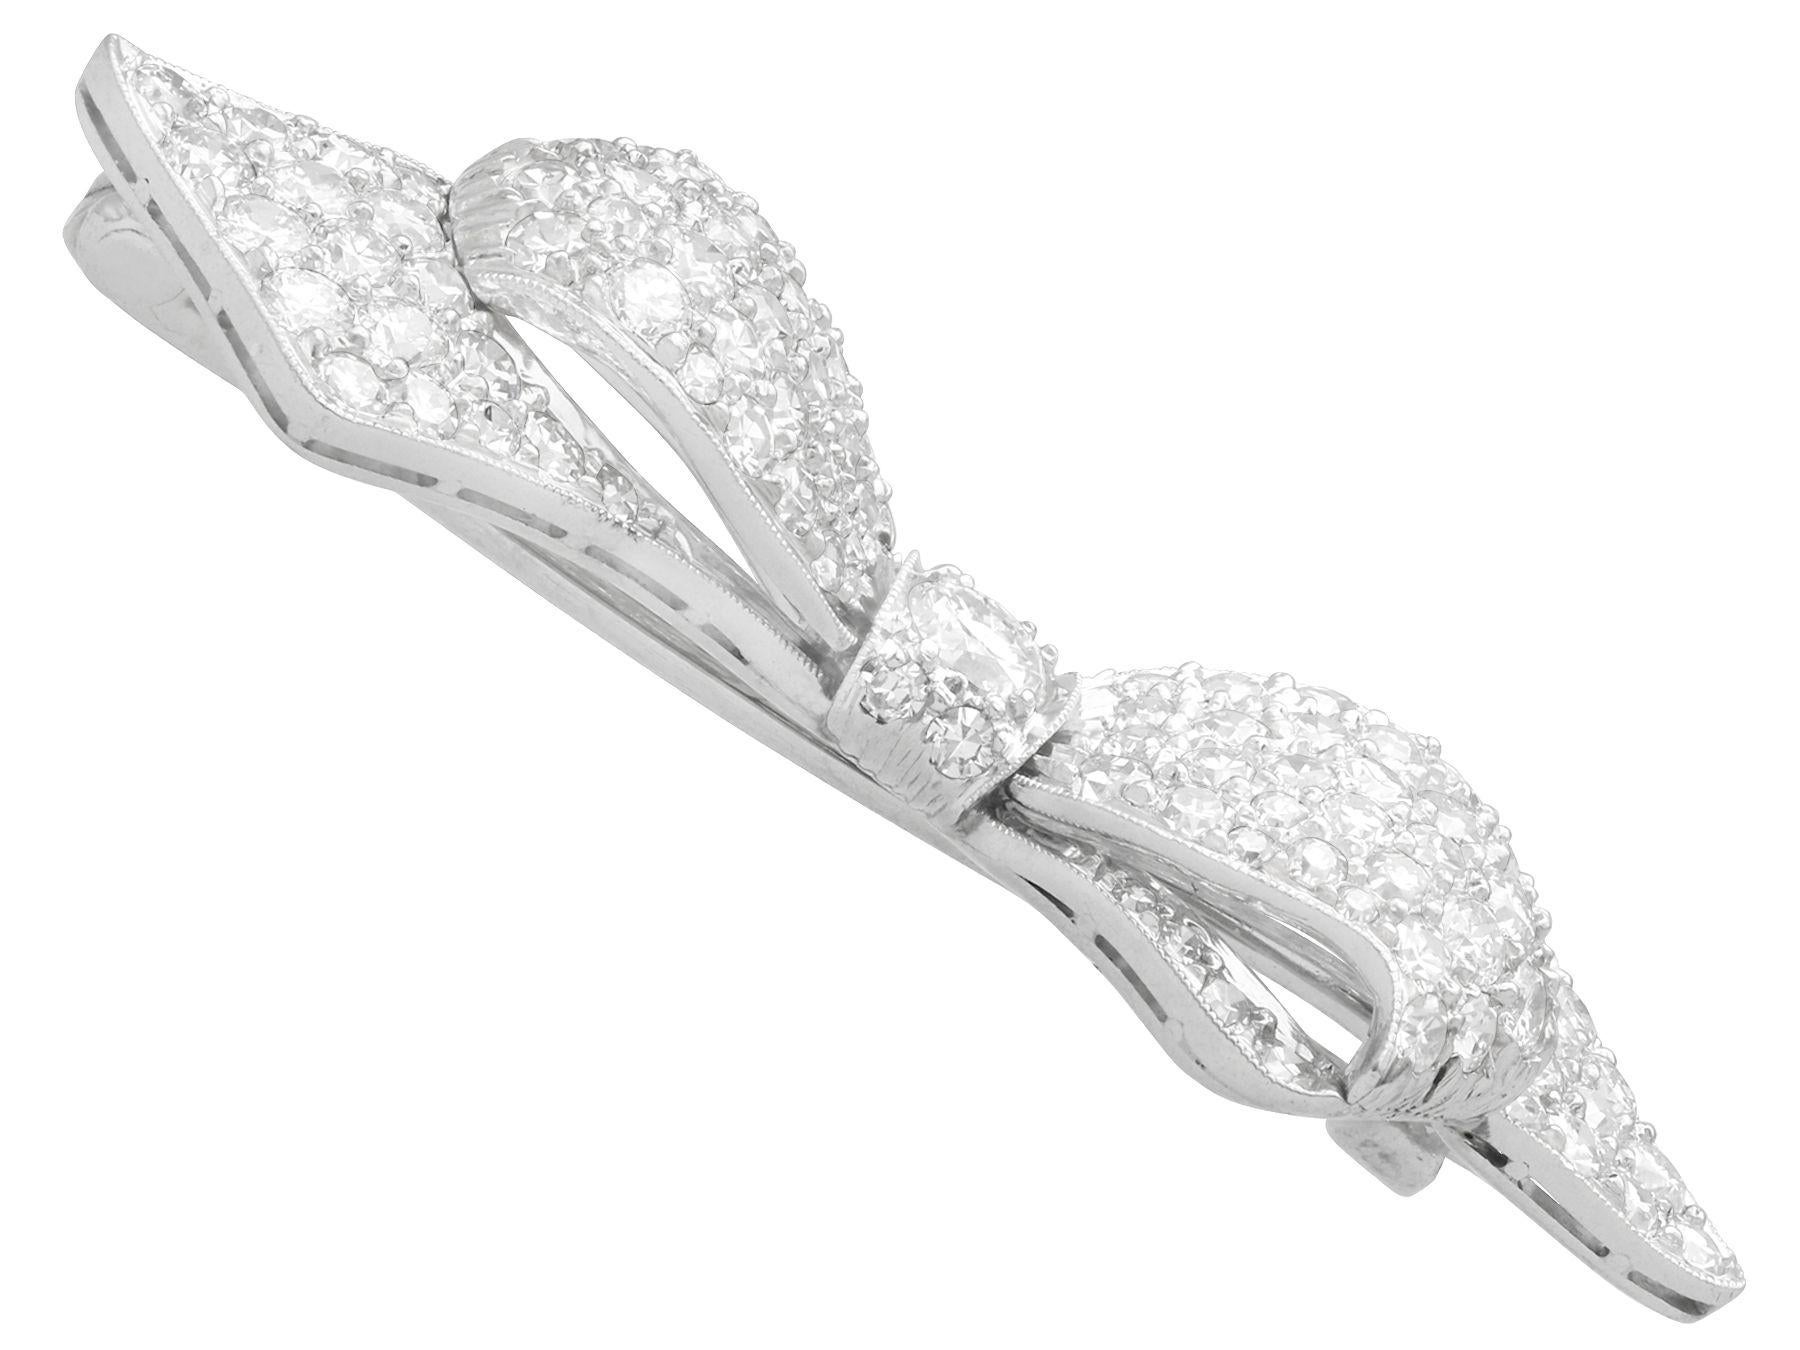 Women's or Men's Antique 1.99 Carat Diamond and Platinum Bow Brooch Circa 1900 For Sale